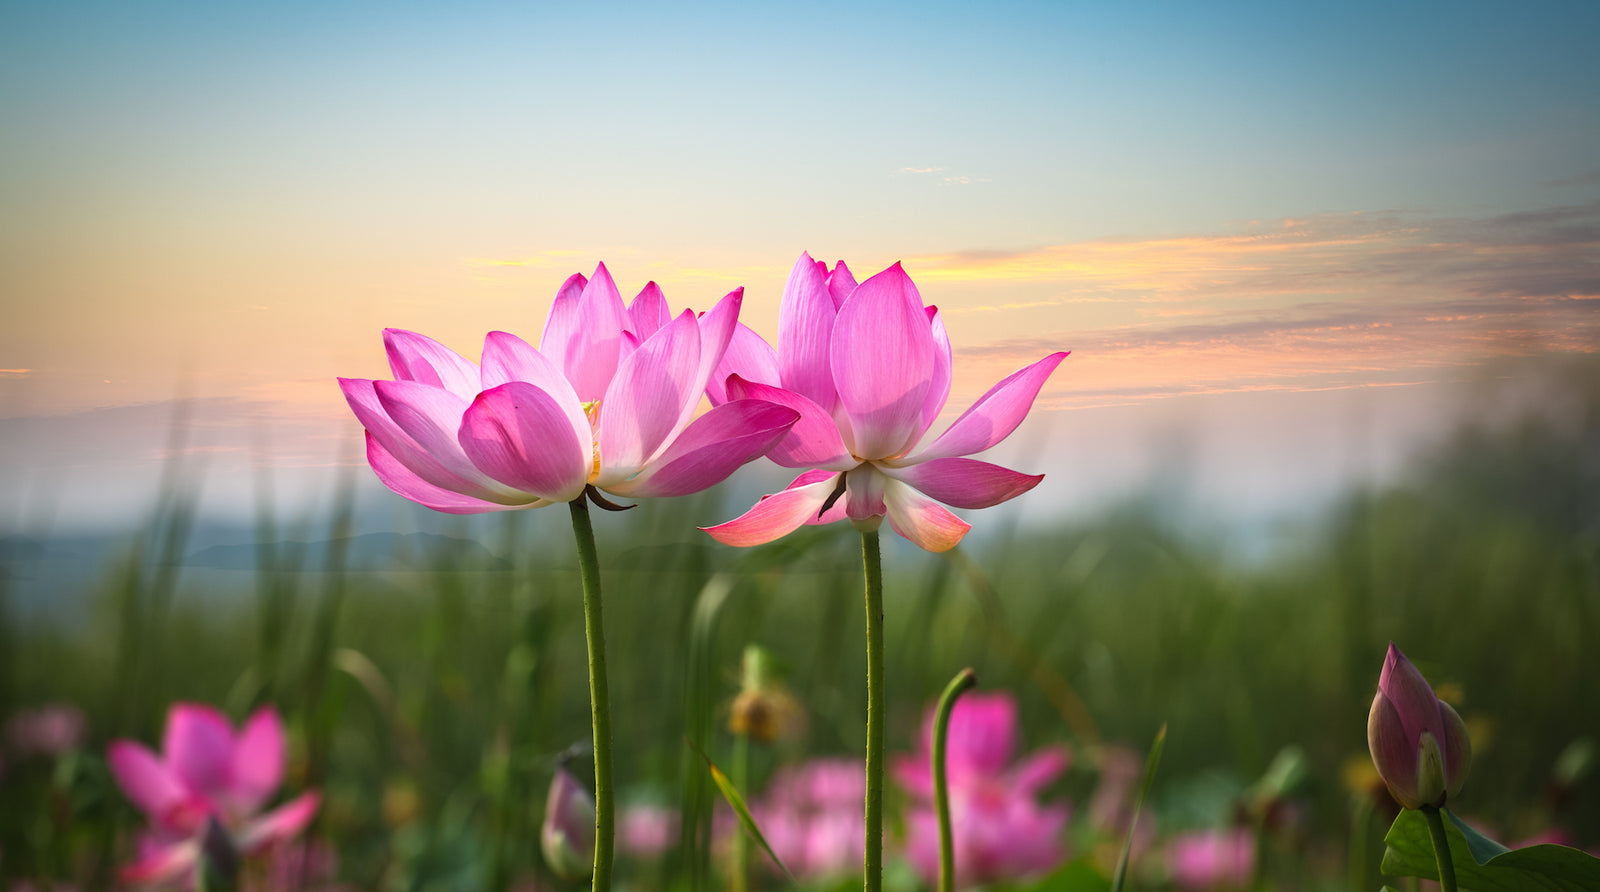 Pink Lotus Flower Meaning and Symbolism (Explained)